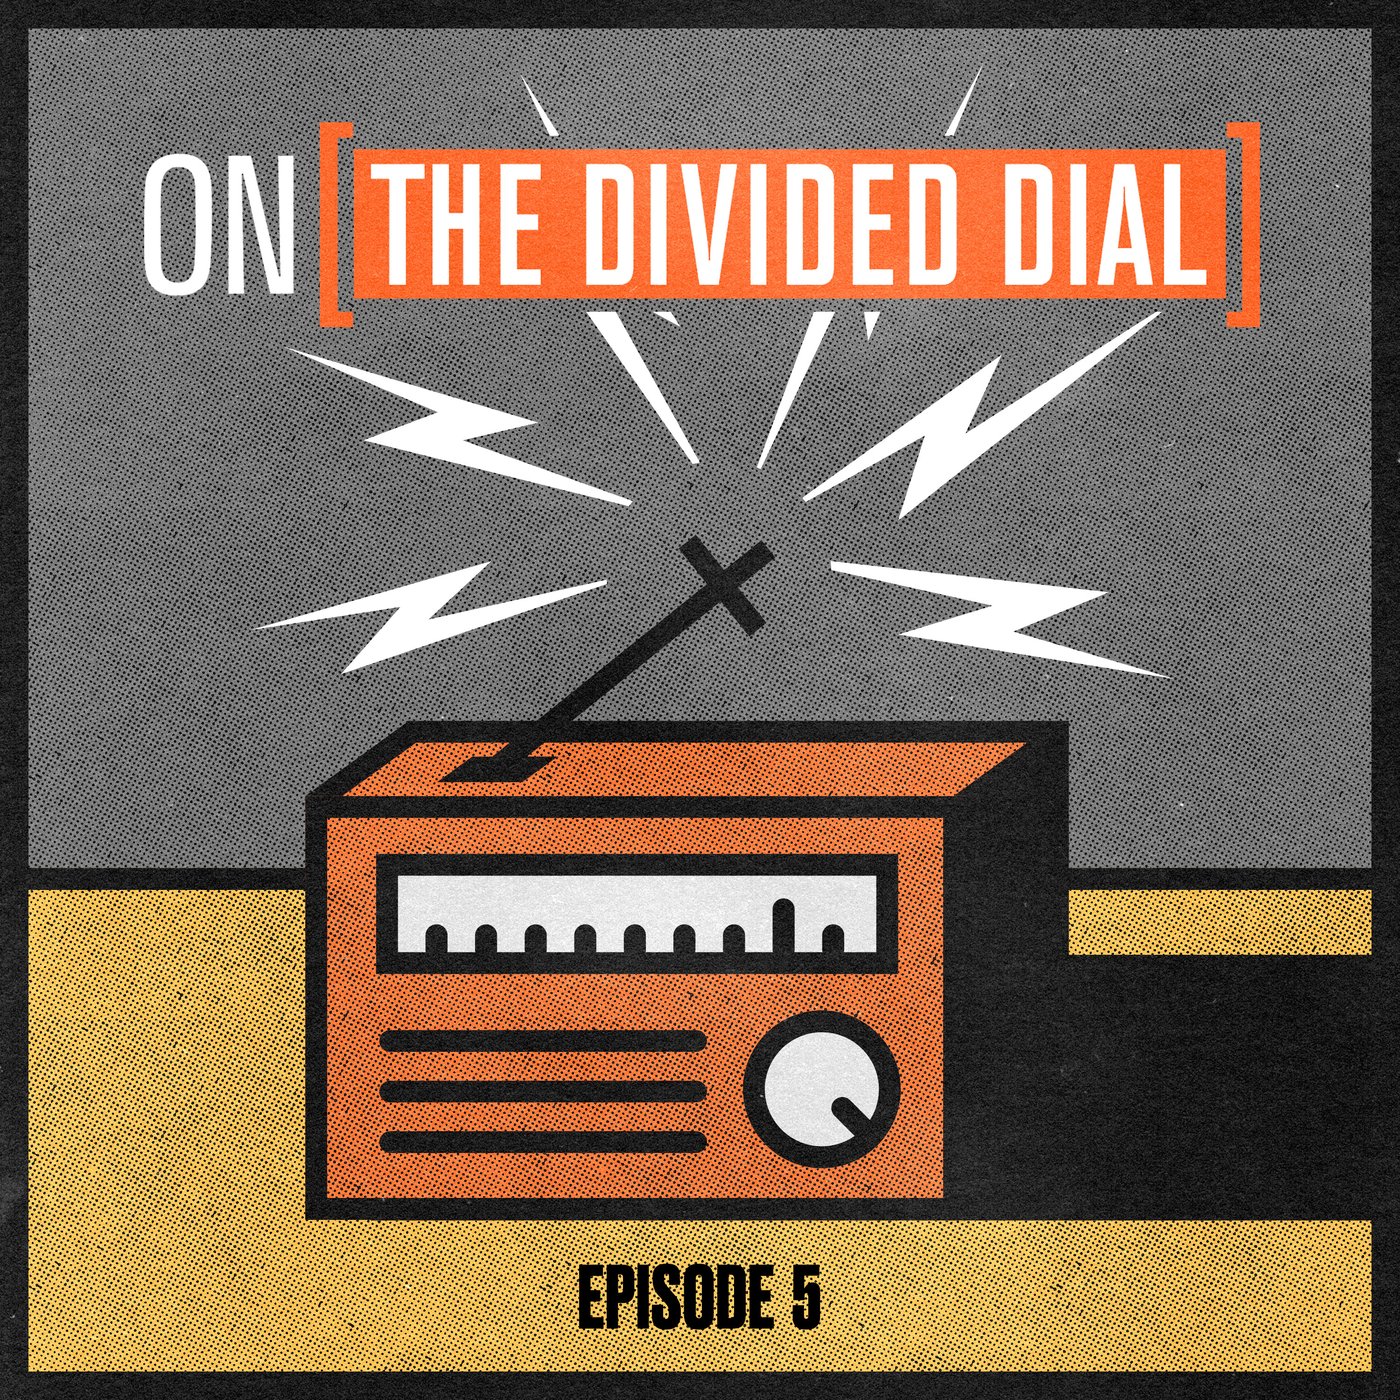 Episode 5 - The Divided Dial